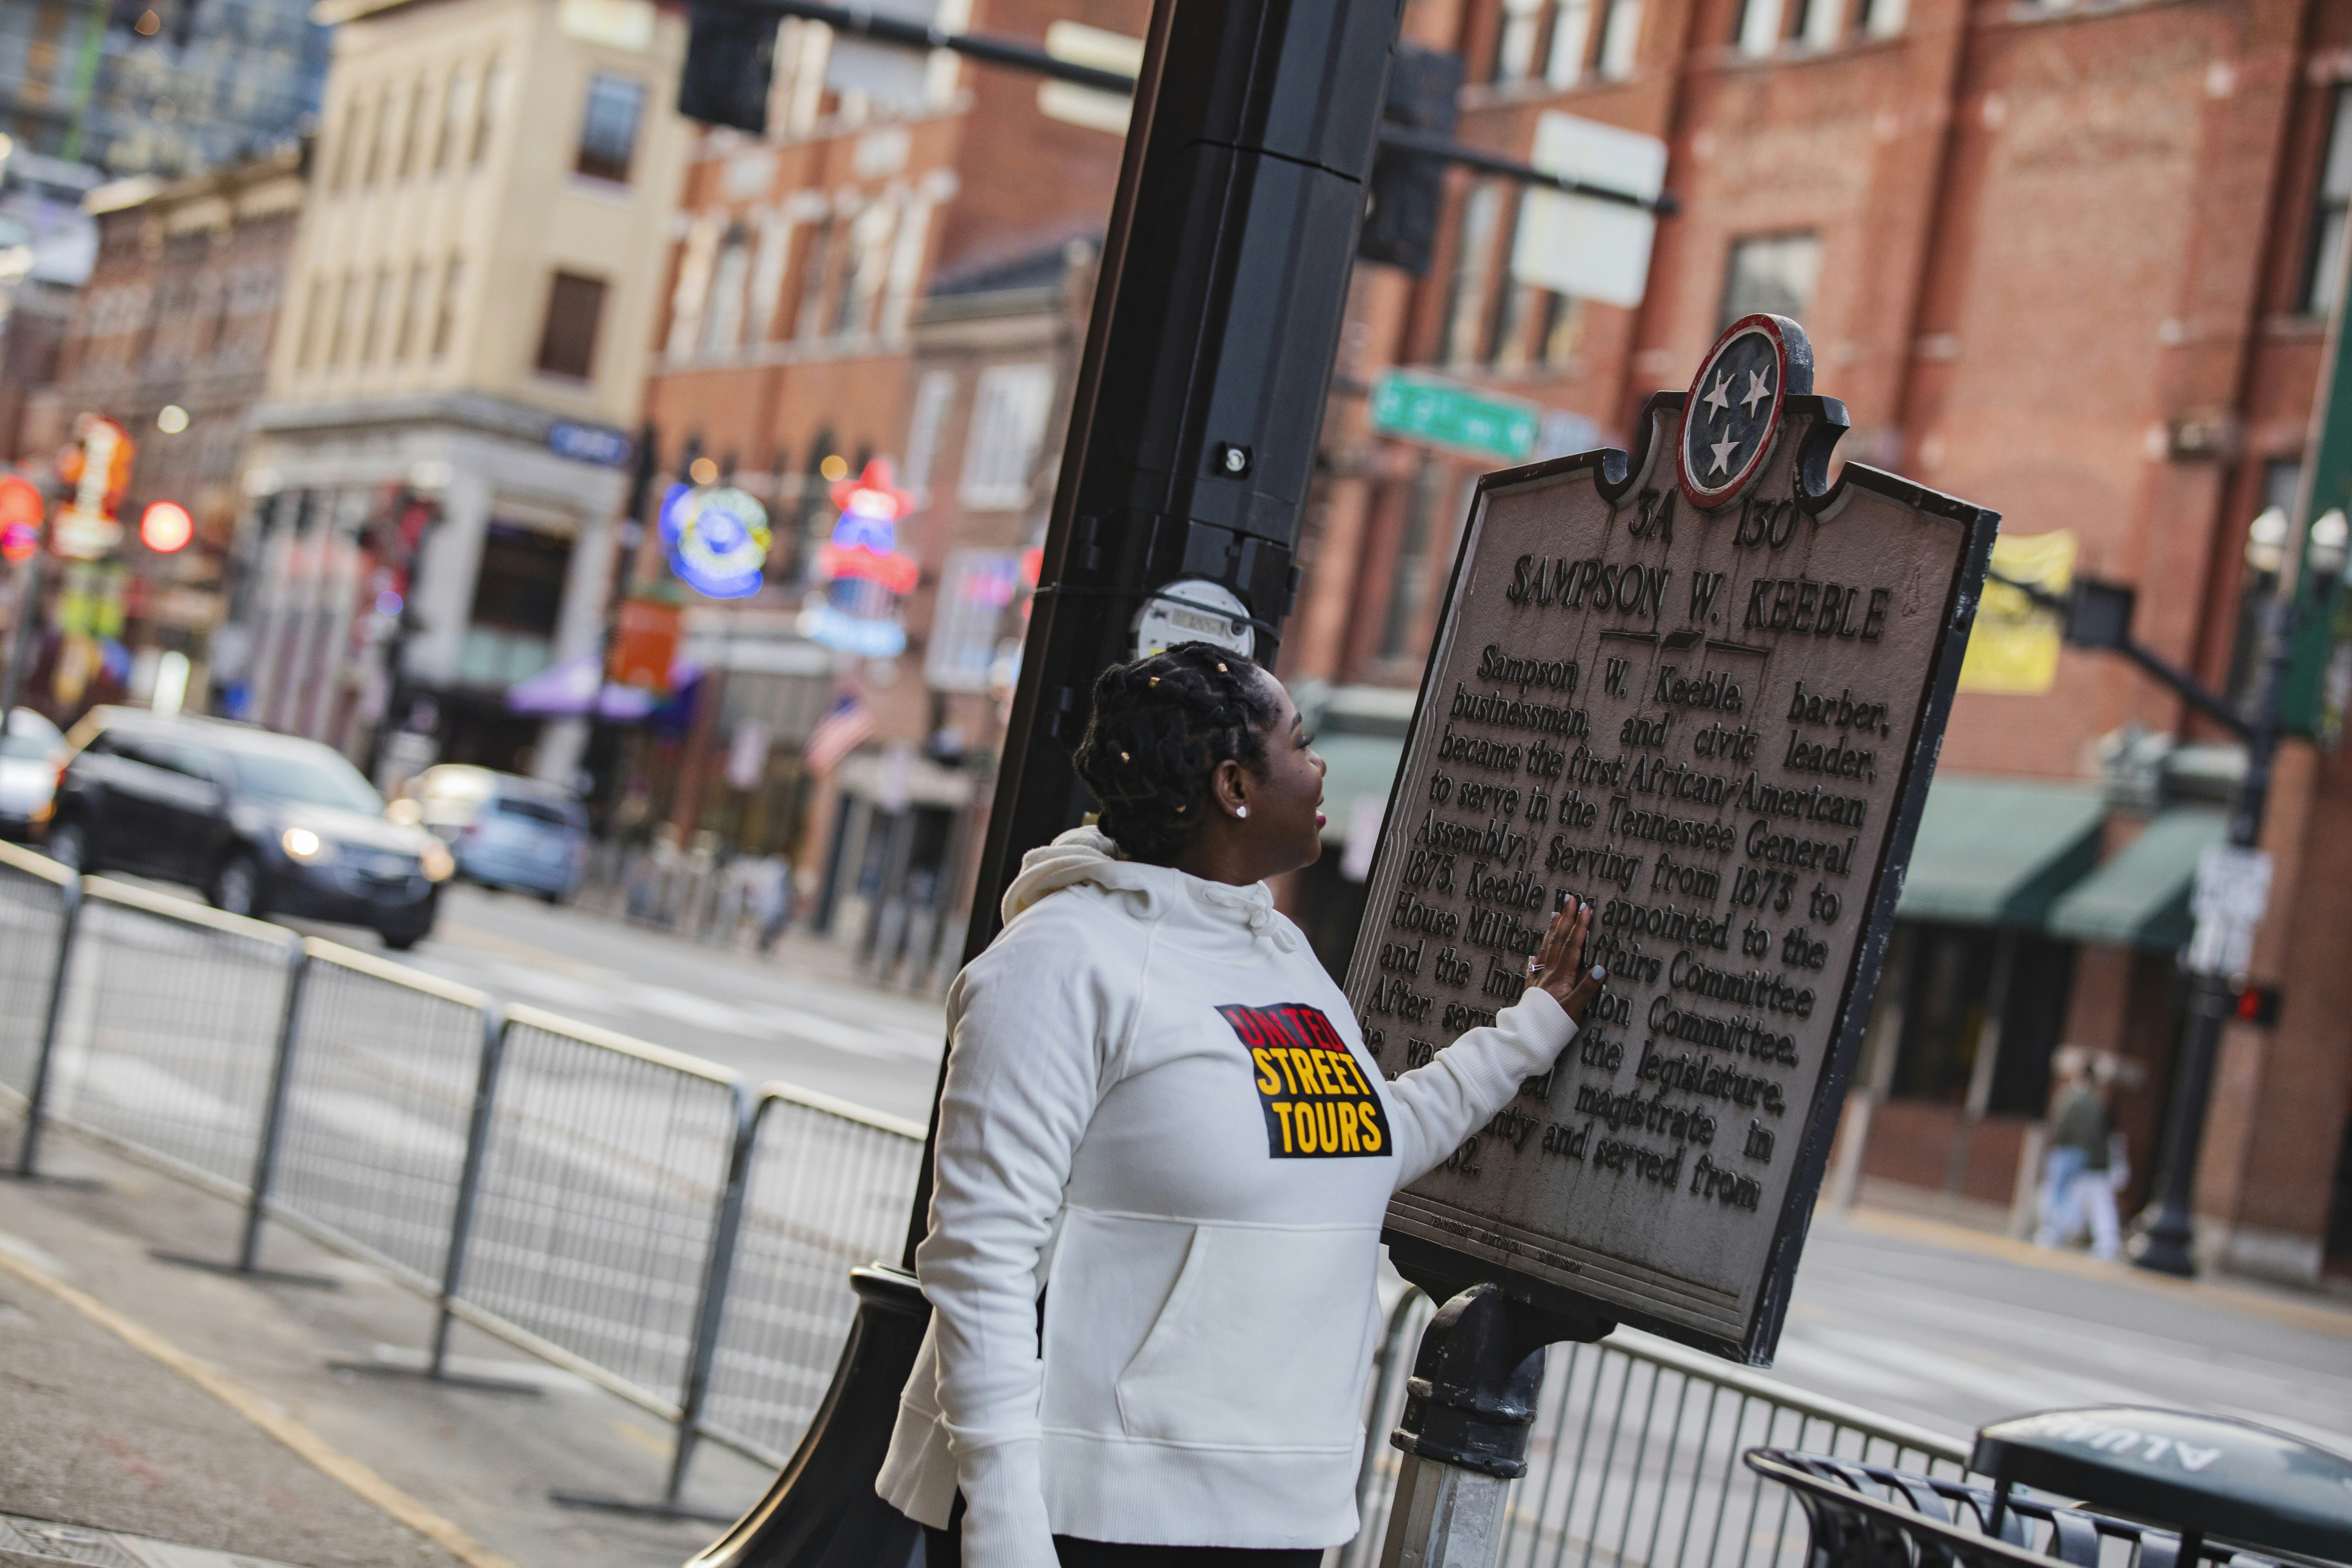 A woman wearing a white sweatshirt that says 'United Street Tours' touches a sign memorializing Sampson W. Keeble on a busy sidewalk in downtown Nashville.